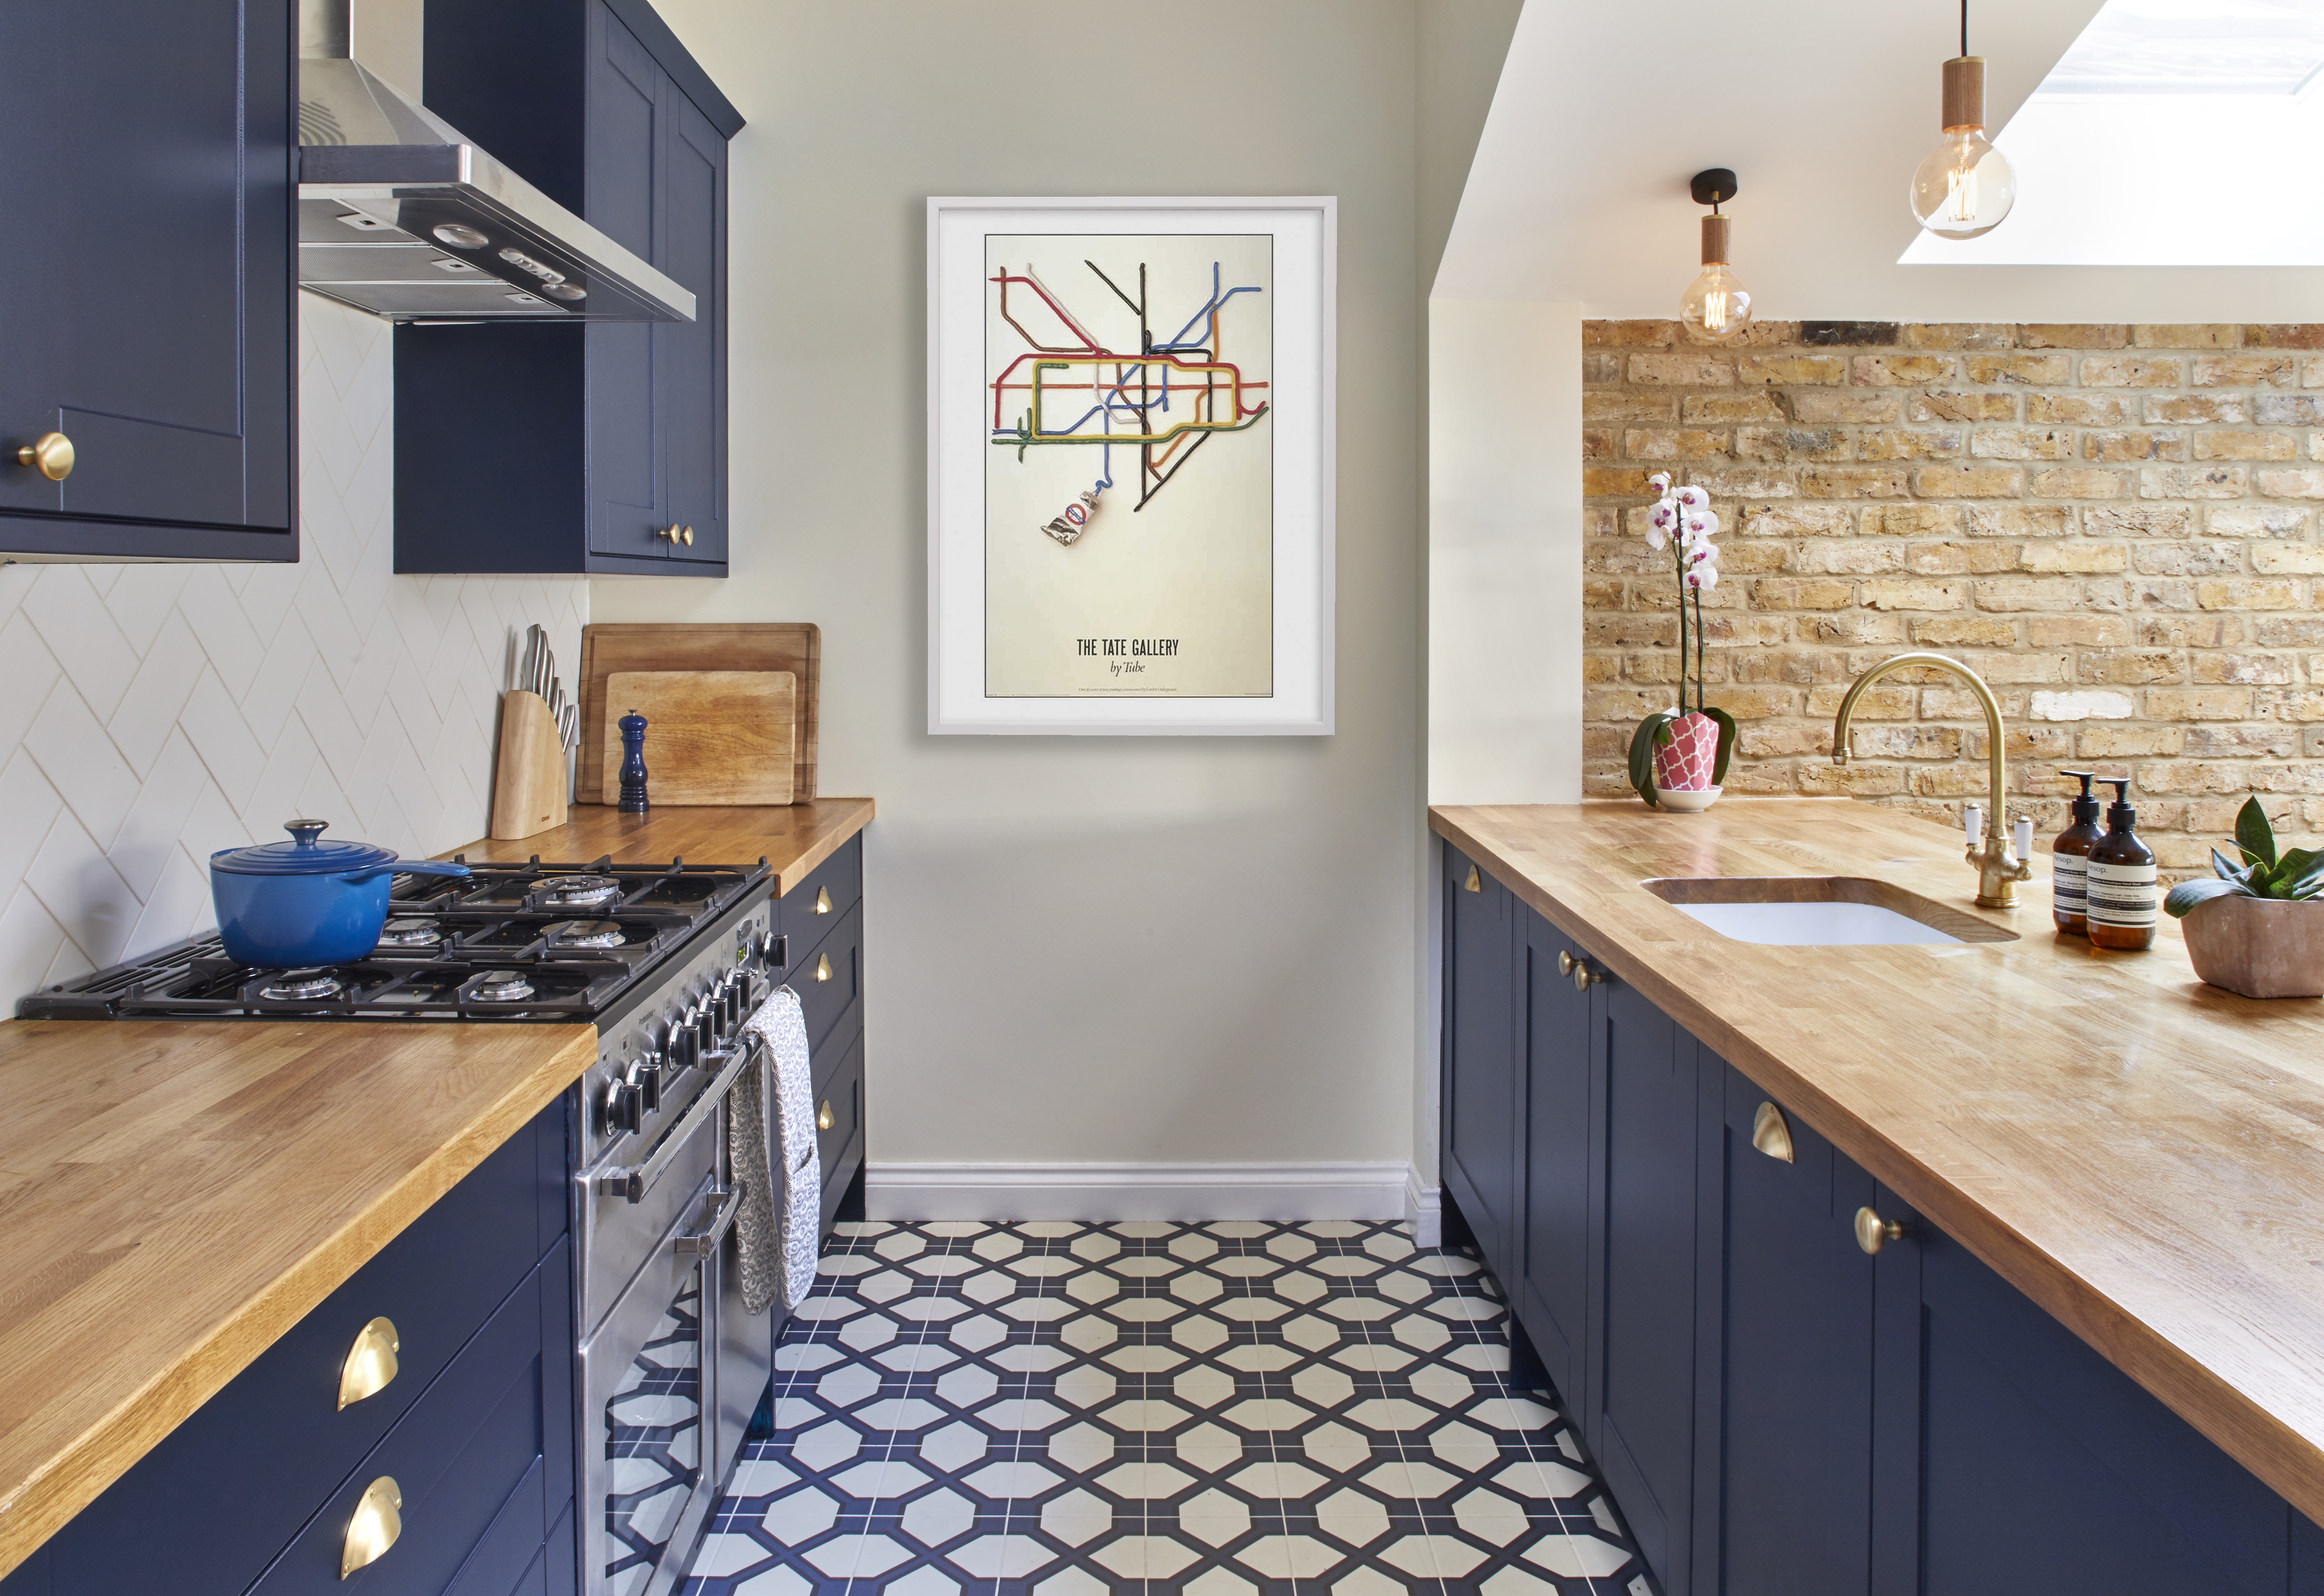 Bespoke farmhouse style kitchen with dark blue shaker cabinets made for West London client by Holland Street Kitchens.